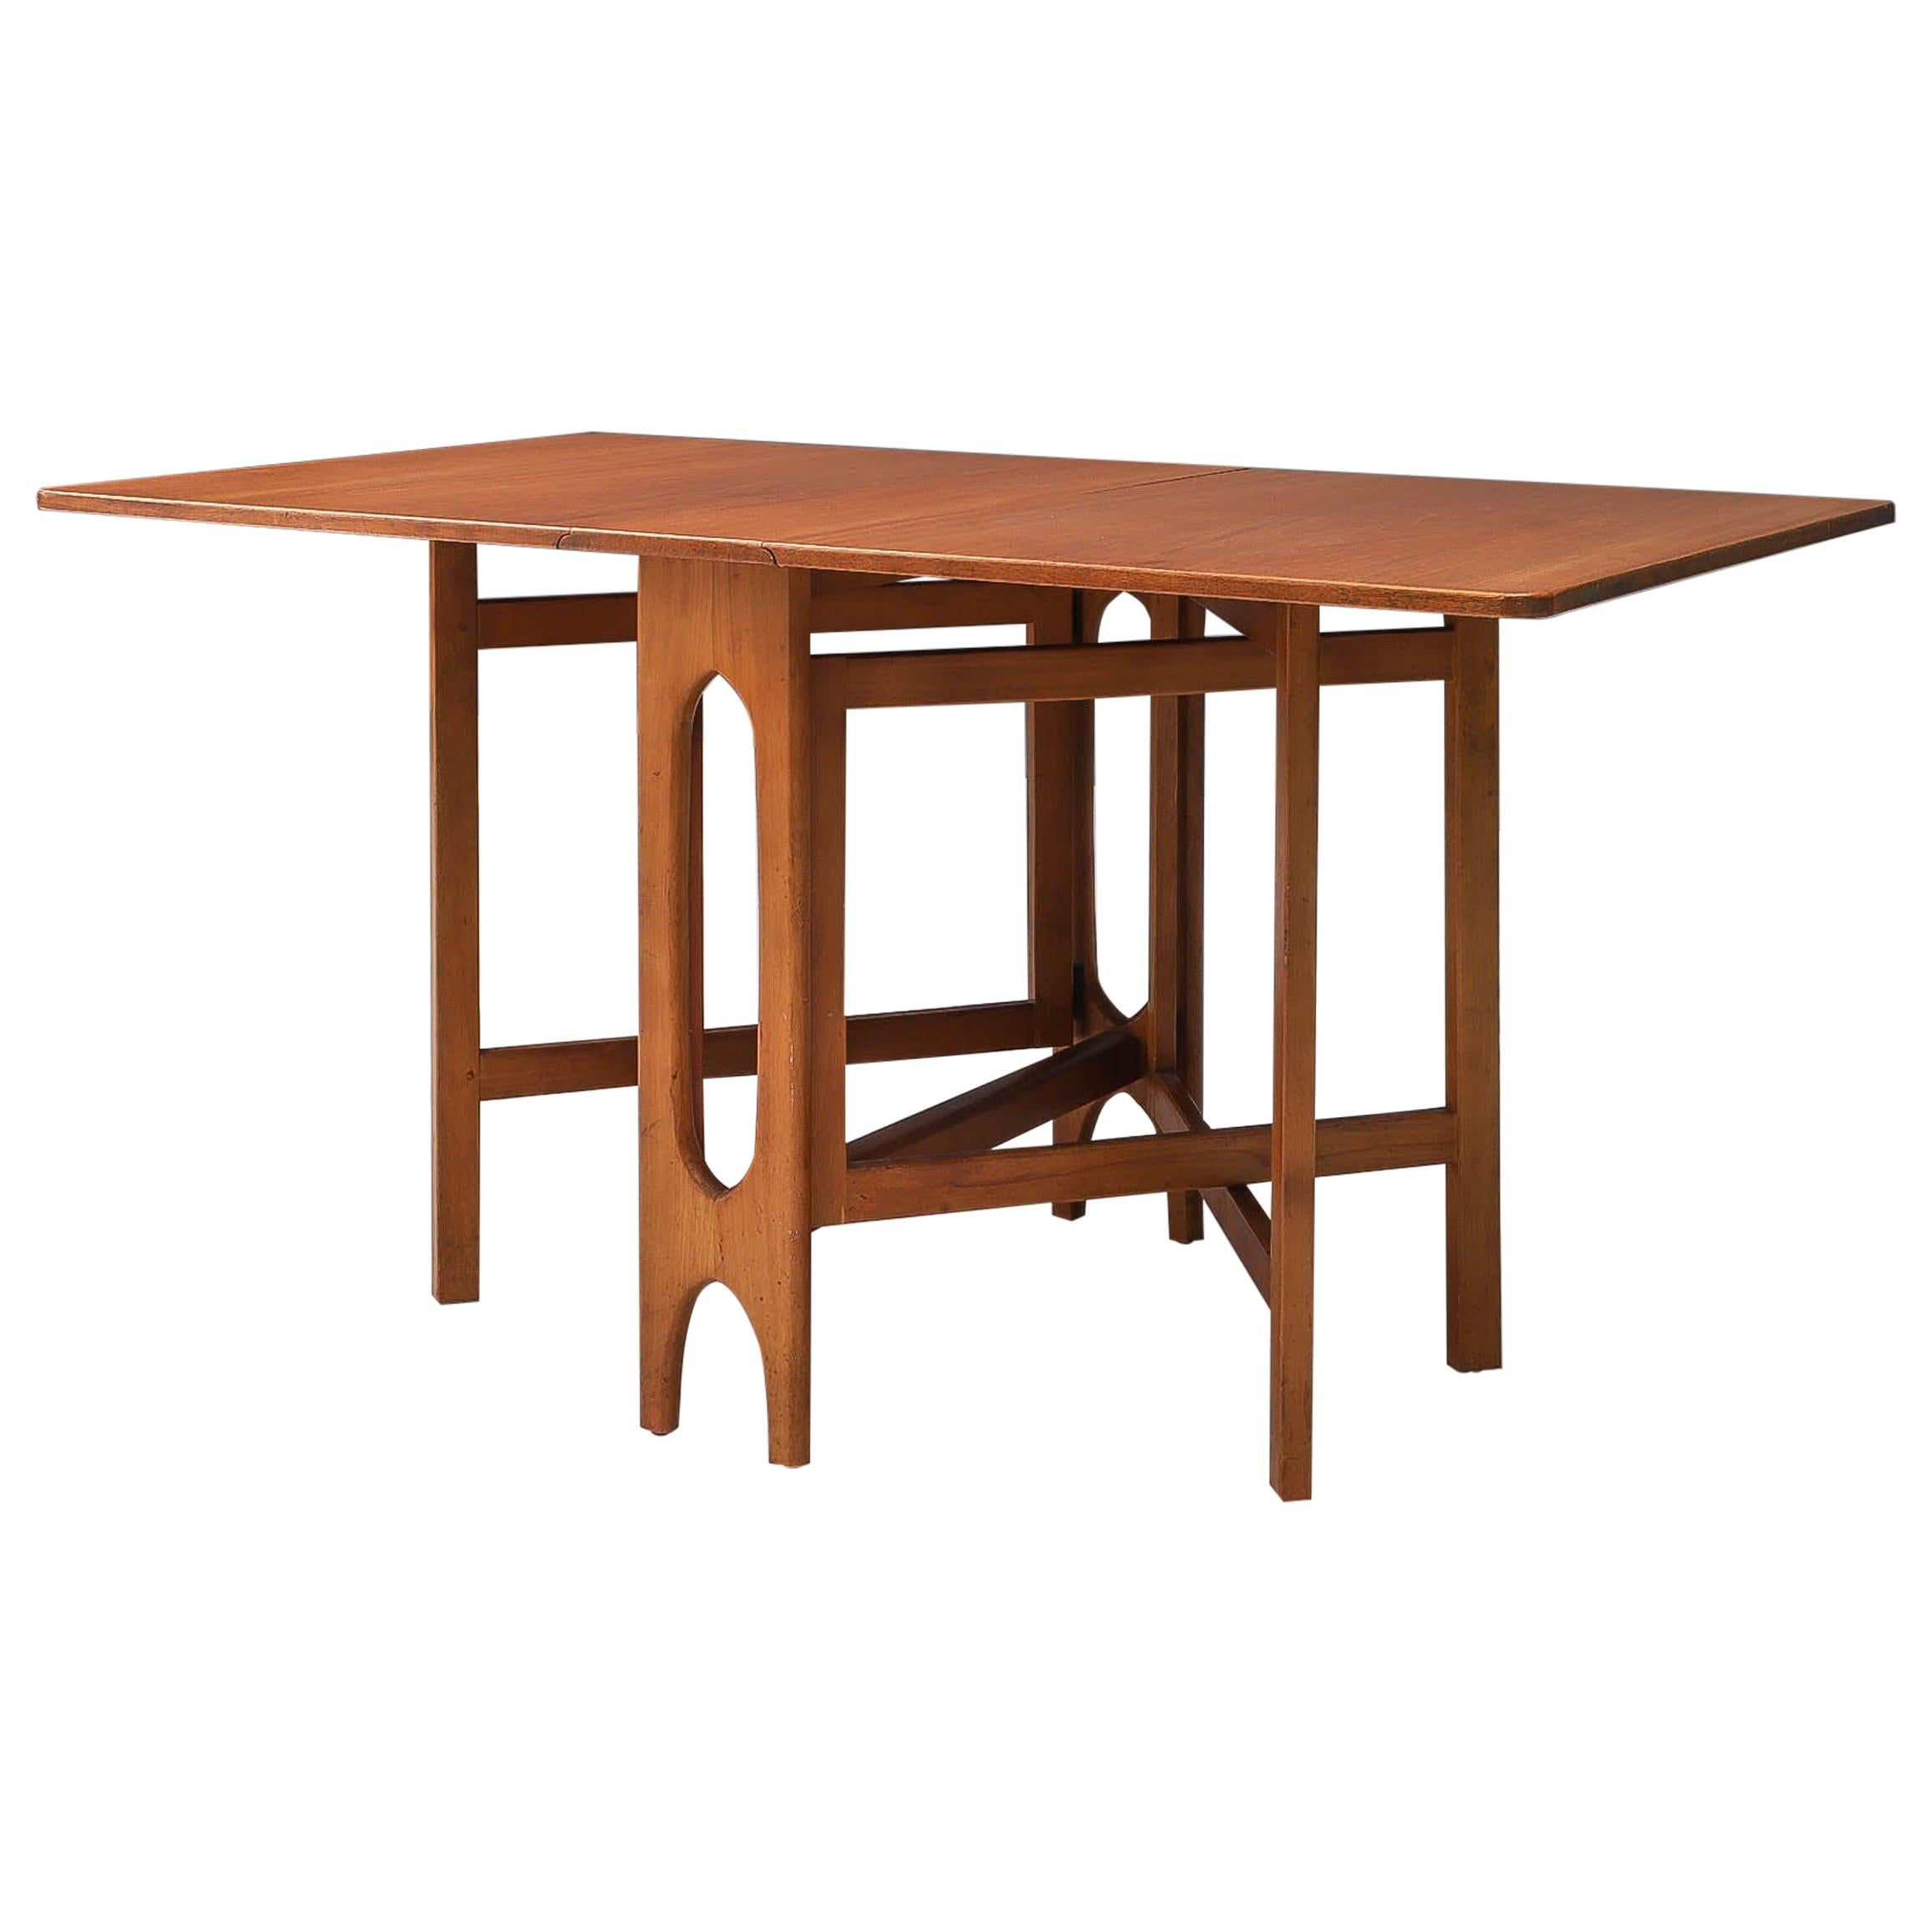 Sculptural Dining Table with Two Drop Leaves in Teak, Denmark, 1960's